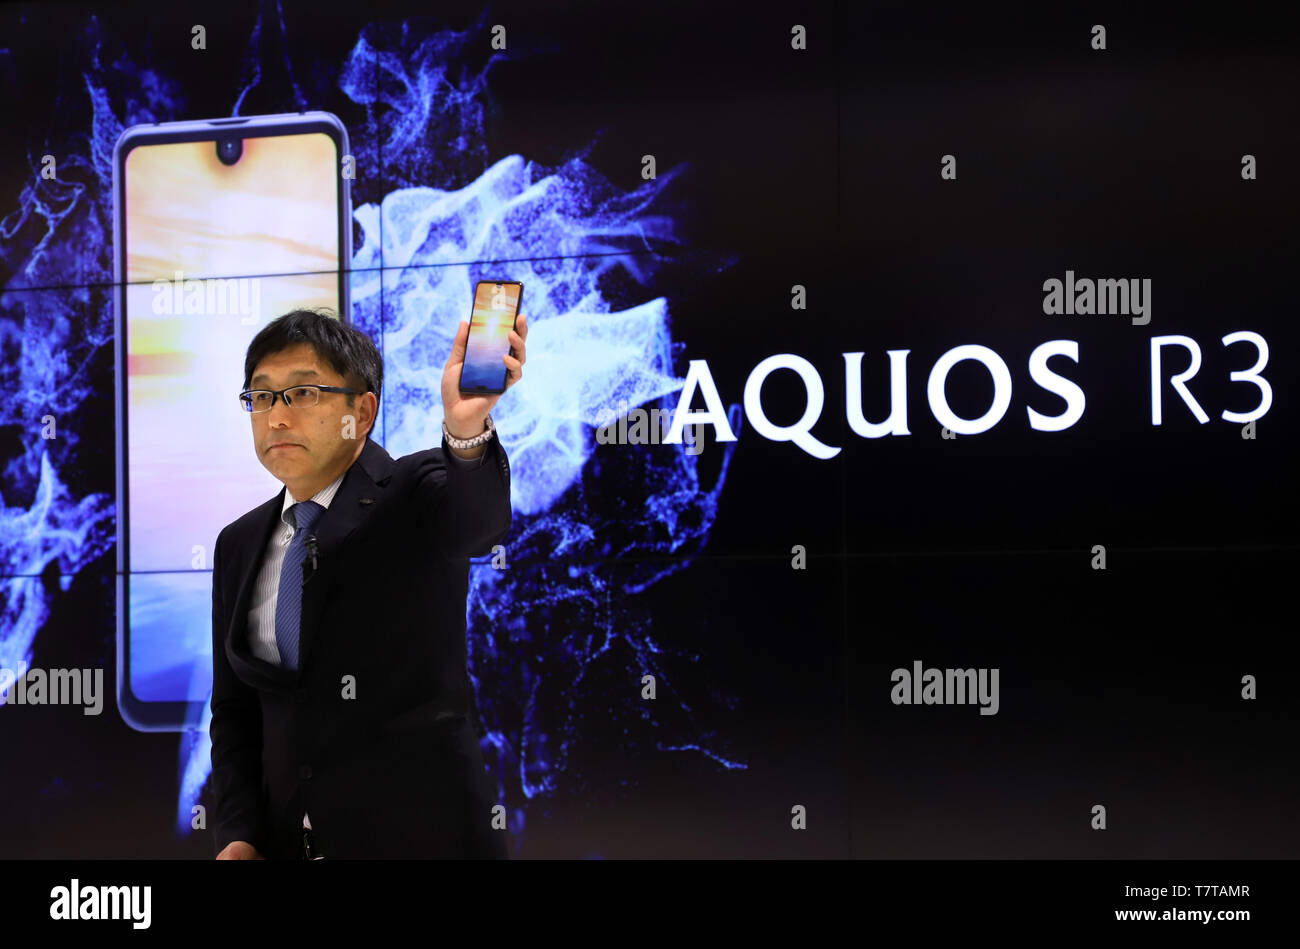 Tokyo, Japan. 8th May, 2019. Japanese electronics giant Sharp mobile communication business unit president Yoshiro Nakano displays the company's new smart phone 'AQUOS R3' which will go on sale this summer at the company's Tokyo office on Wednesday, May 8, 2019. The new AQUOS smart phone has newly developed 6.2-inch sized IGZO LCD on its display which can reproduce 1 billion color images. Credit: Yoshio Tsunoda/AFLO/Alamy Live News Stock Photo